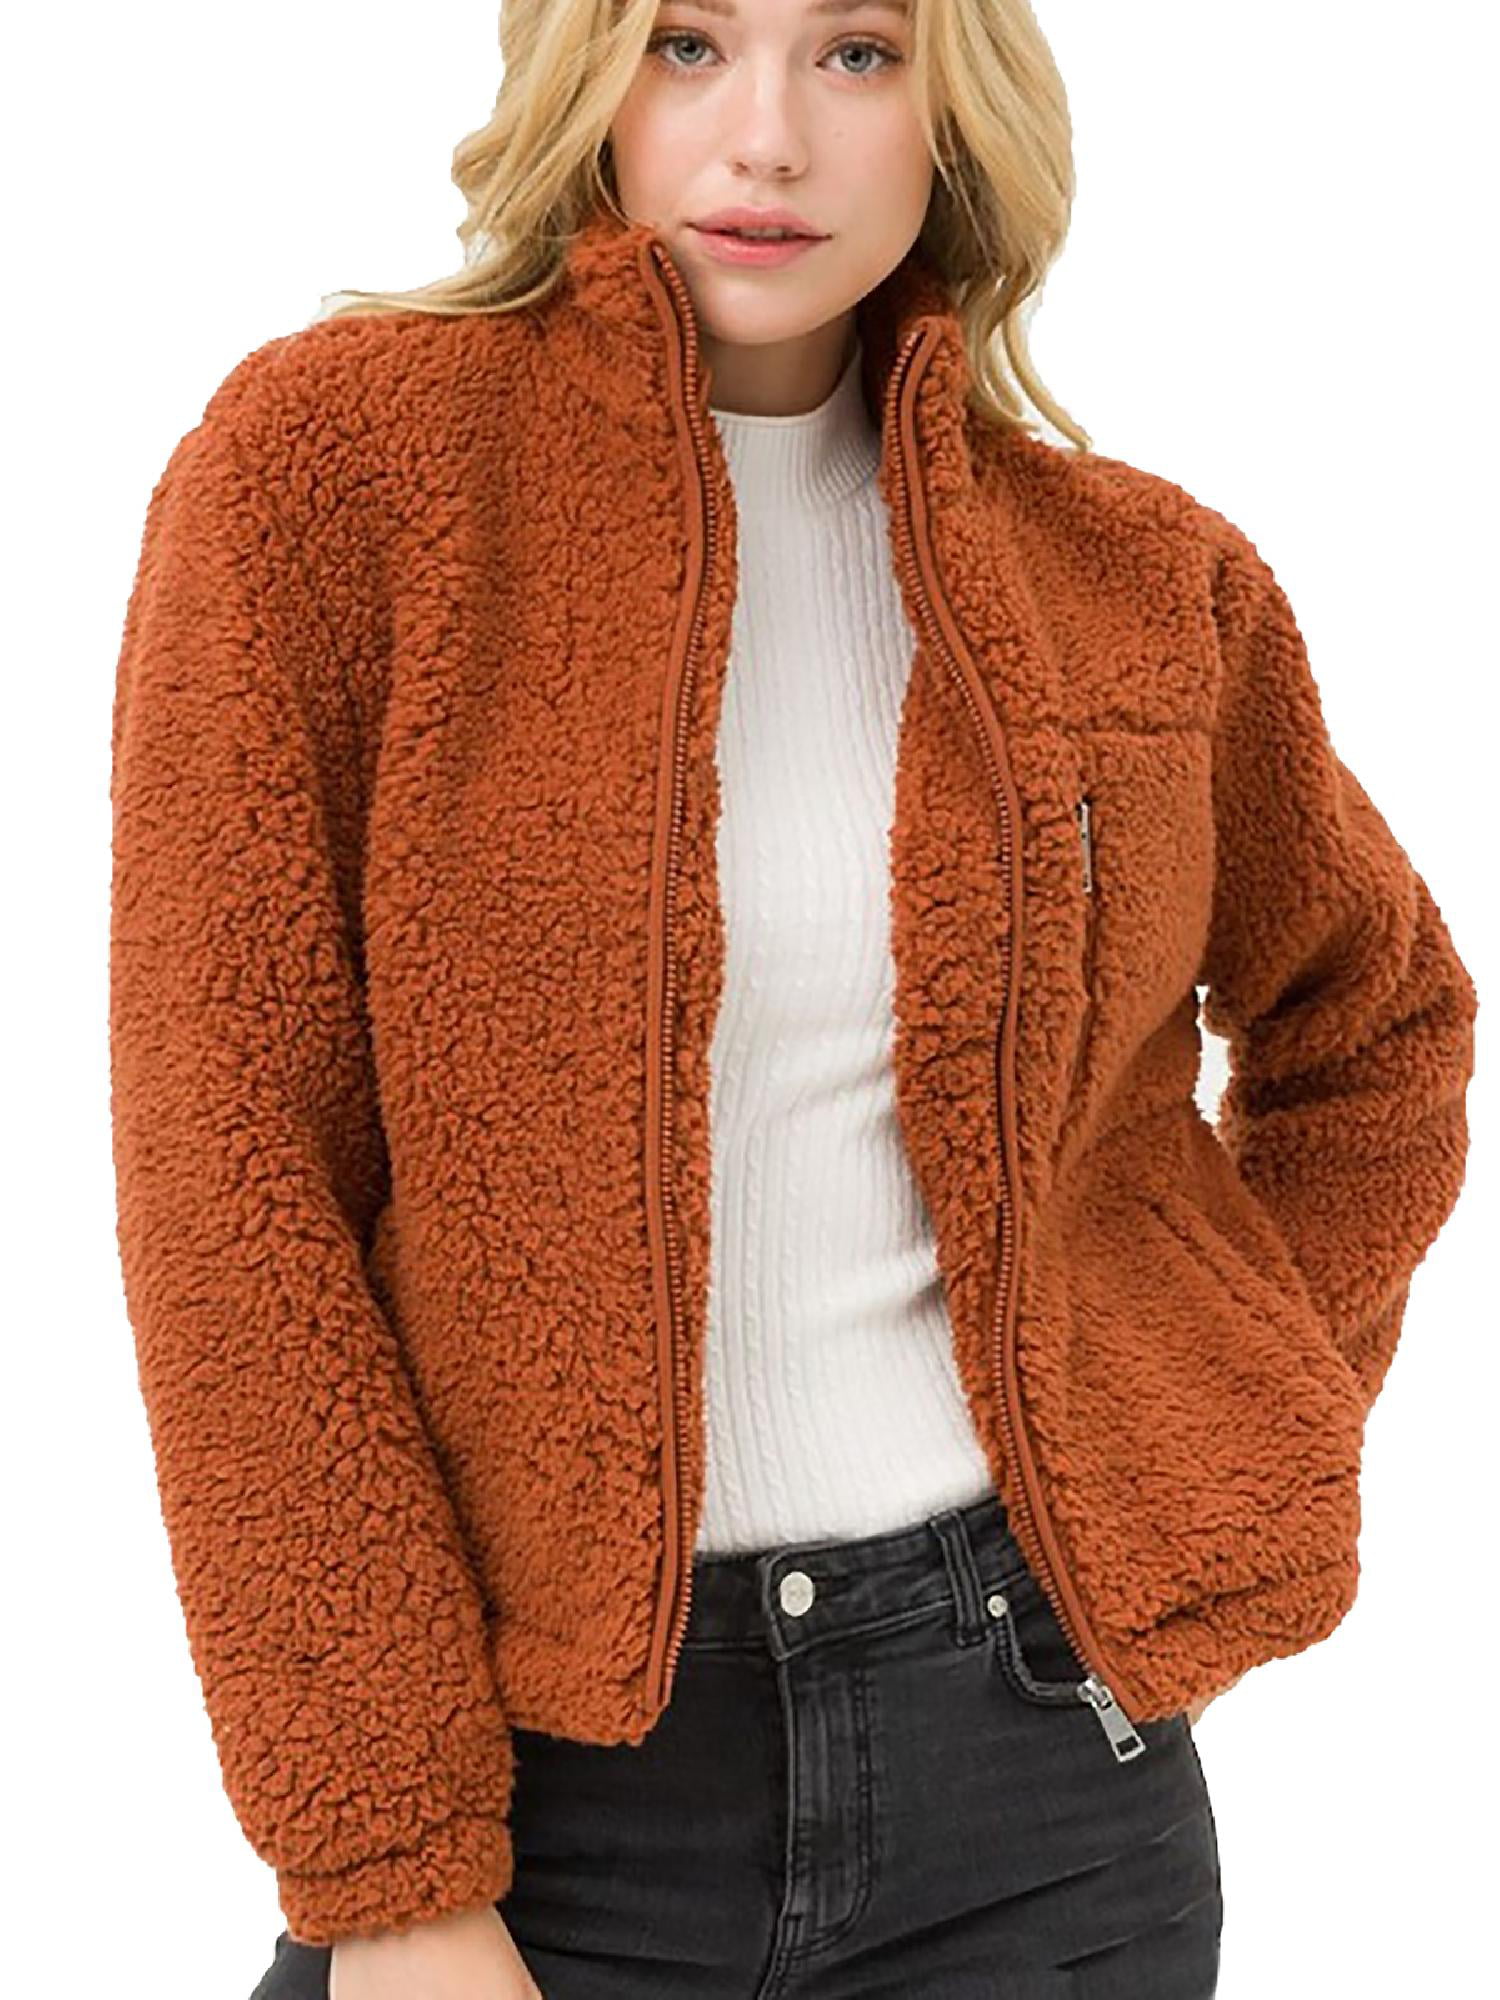 Made by Olivia - Made by Olivia Women's Waist Length Sherpa Zip Up ...